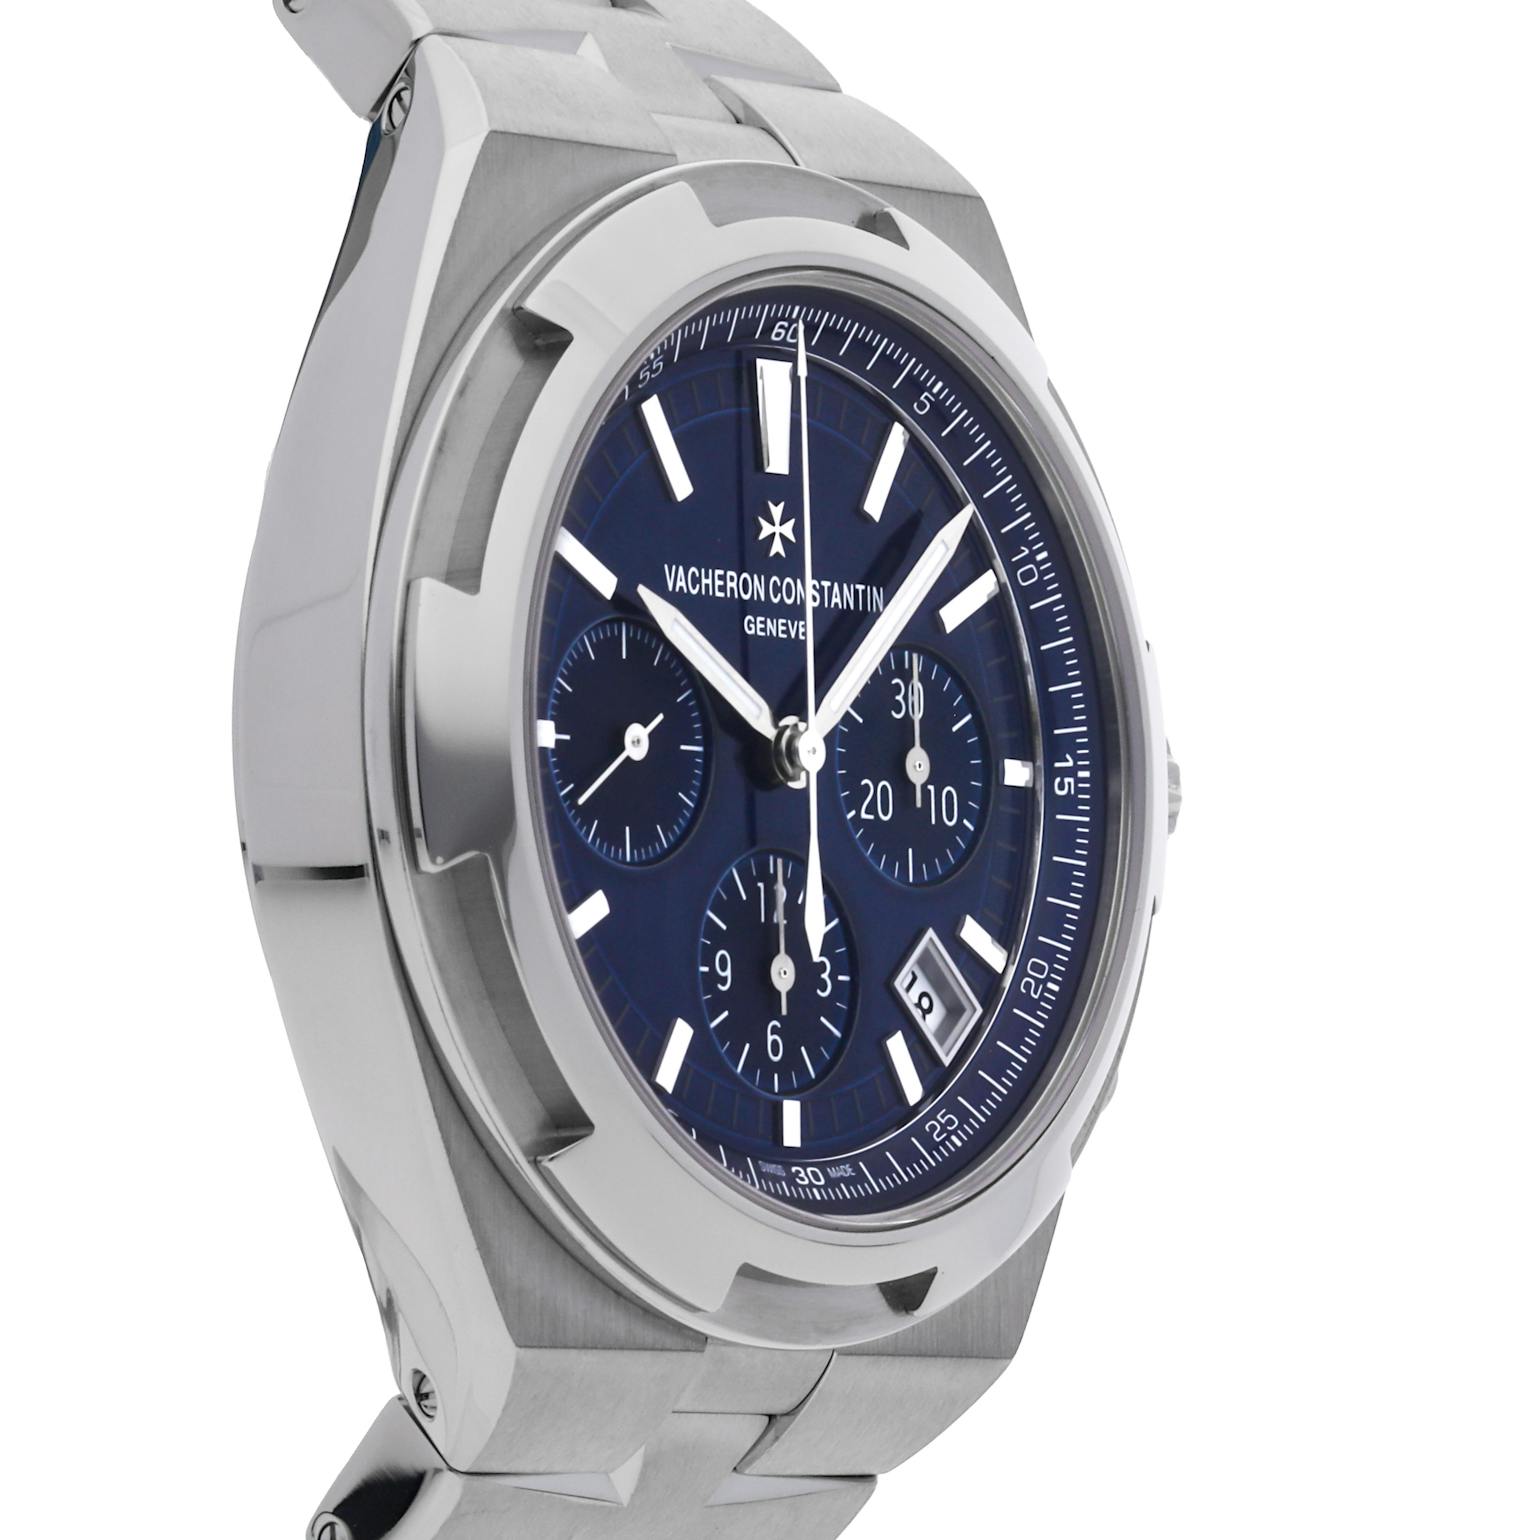 Overseas 42.5mm Blue Dial Automatic Chronograph Men's Watch